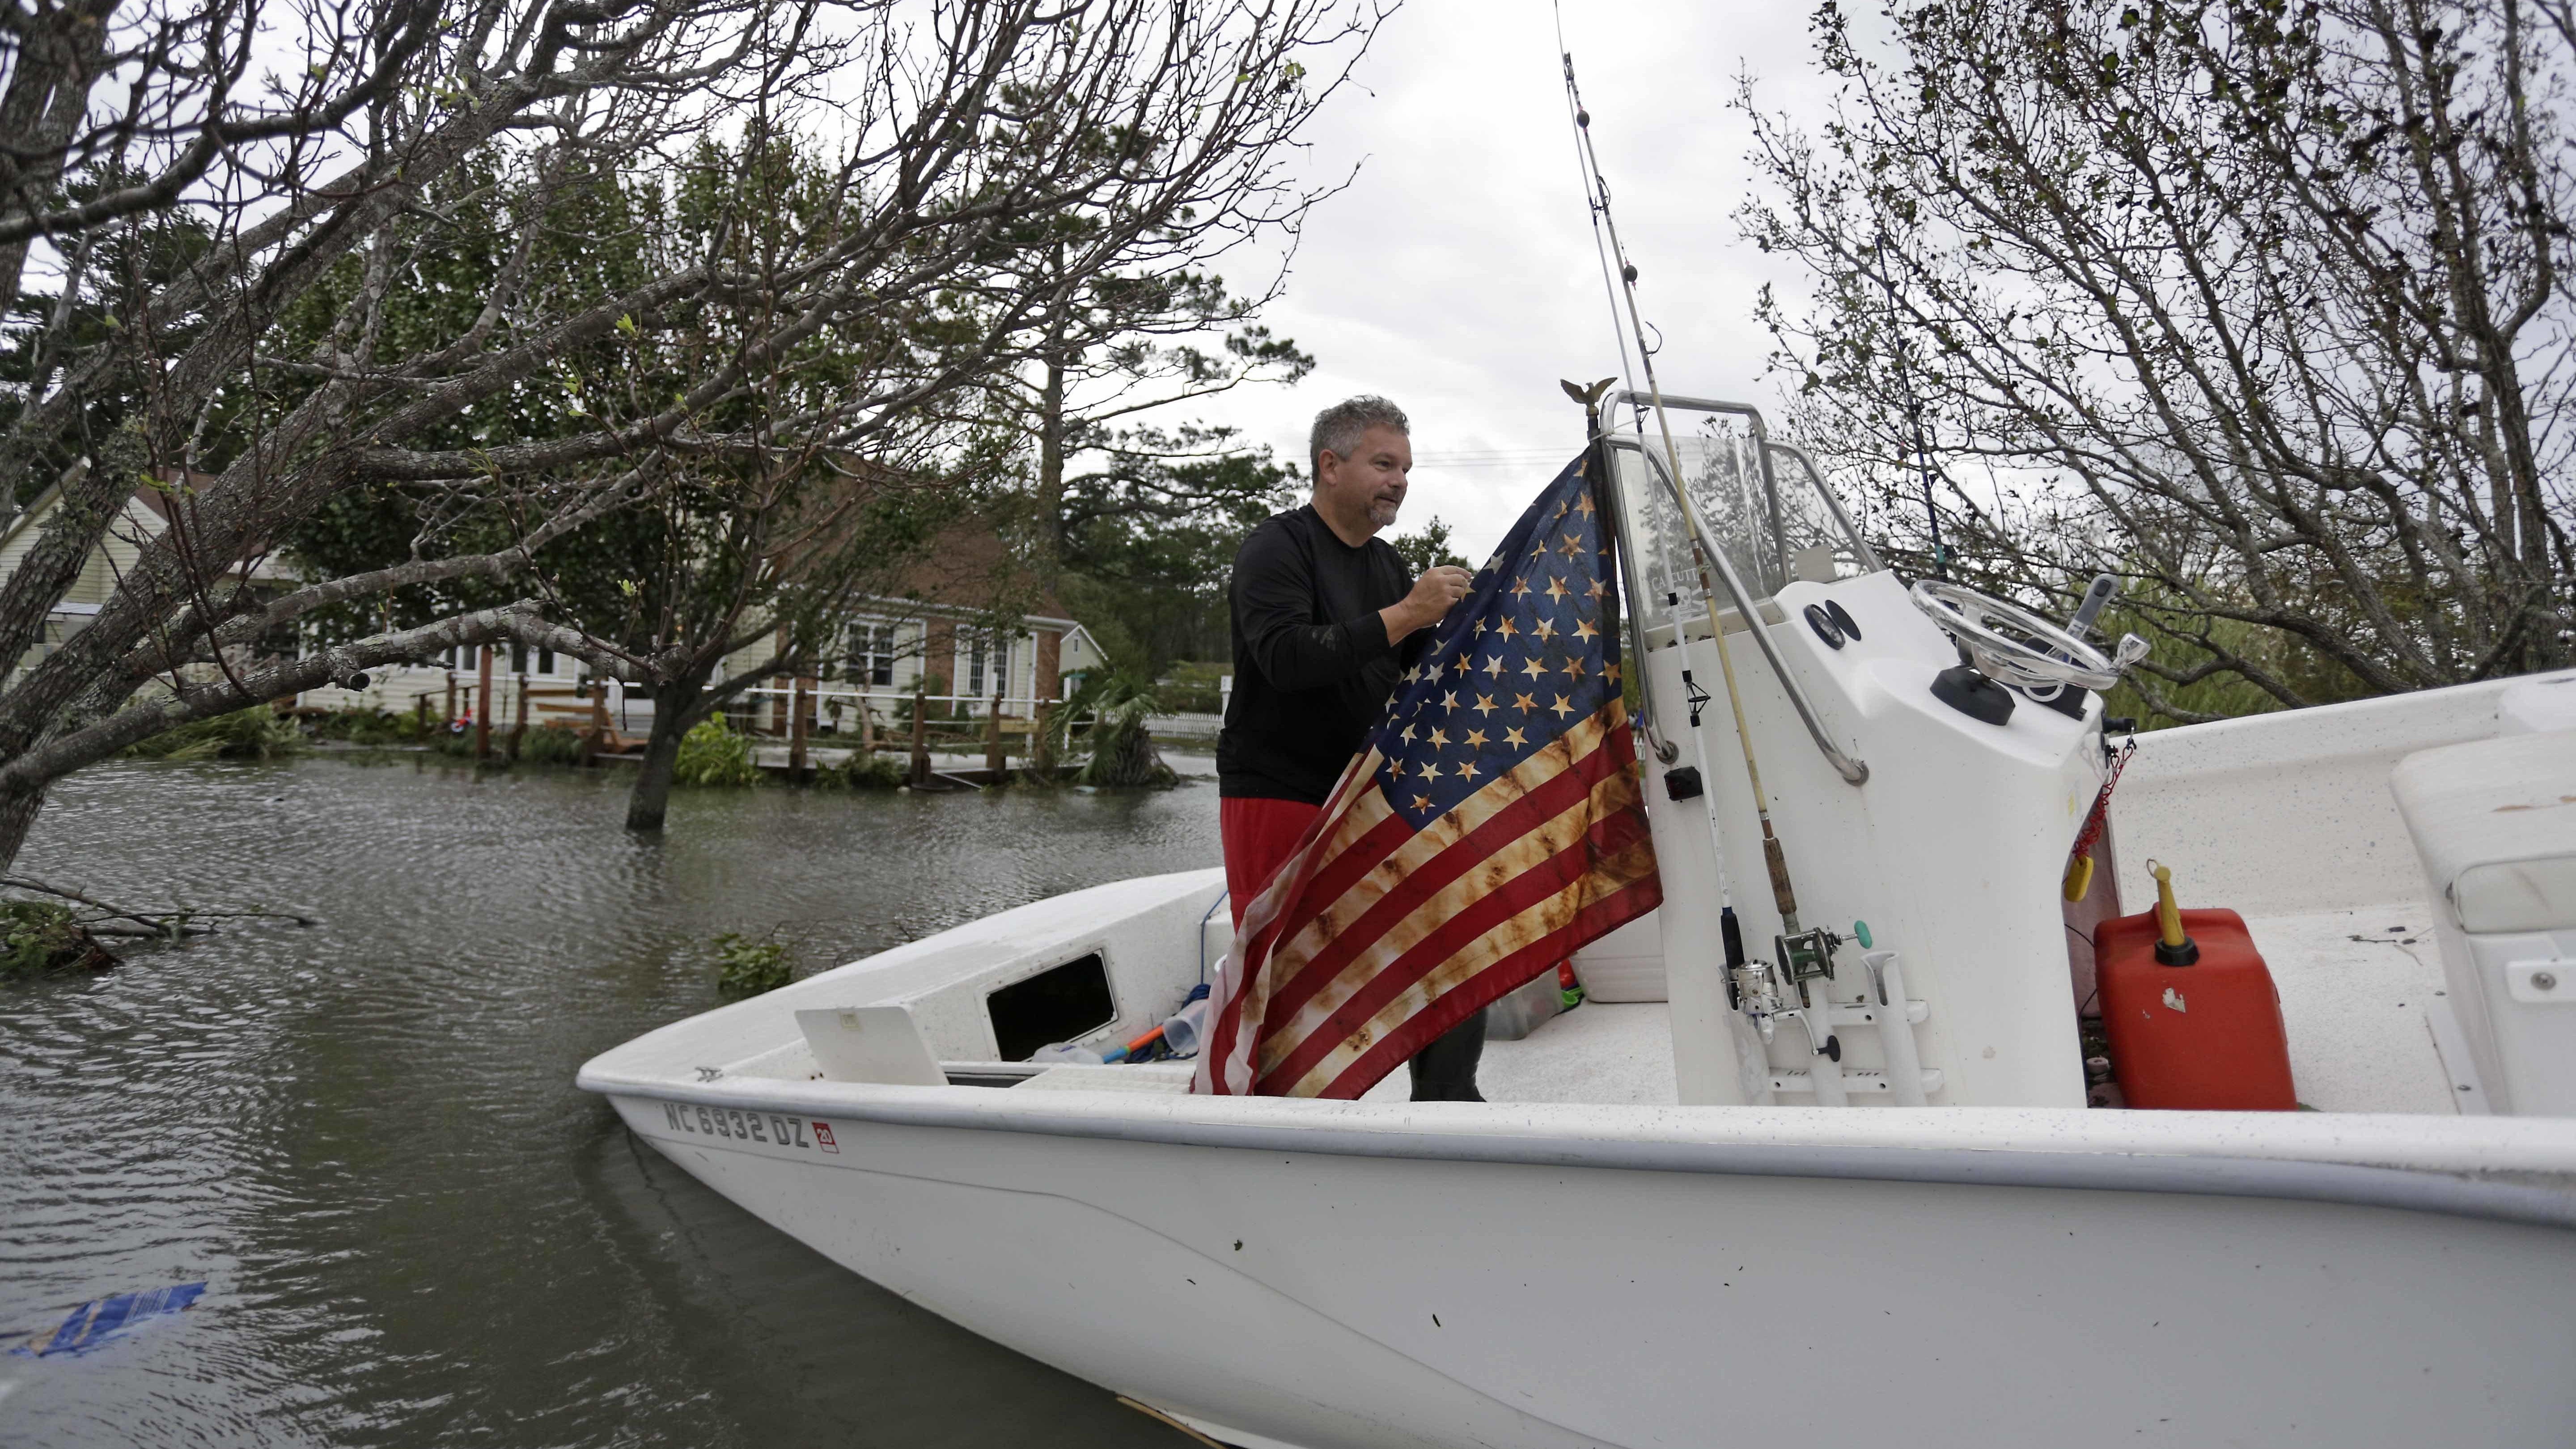 Jonathan Griffin hangs an American Flag on his boat after Hurricane Florence hit Davis N.C.,Saturday, Sept. 15, 2018. Griffin said "I'm going to hang this in defiance of Hurricane Florence". (AP Photo/Tom Copeland)